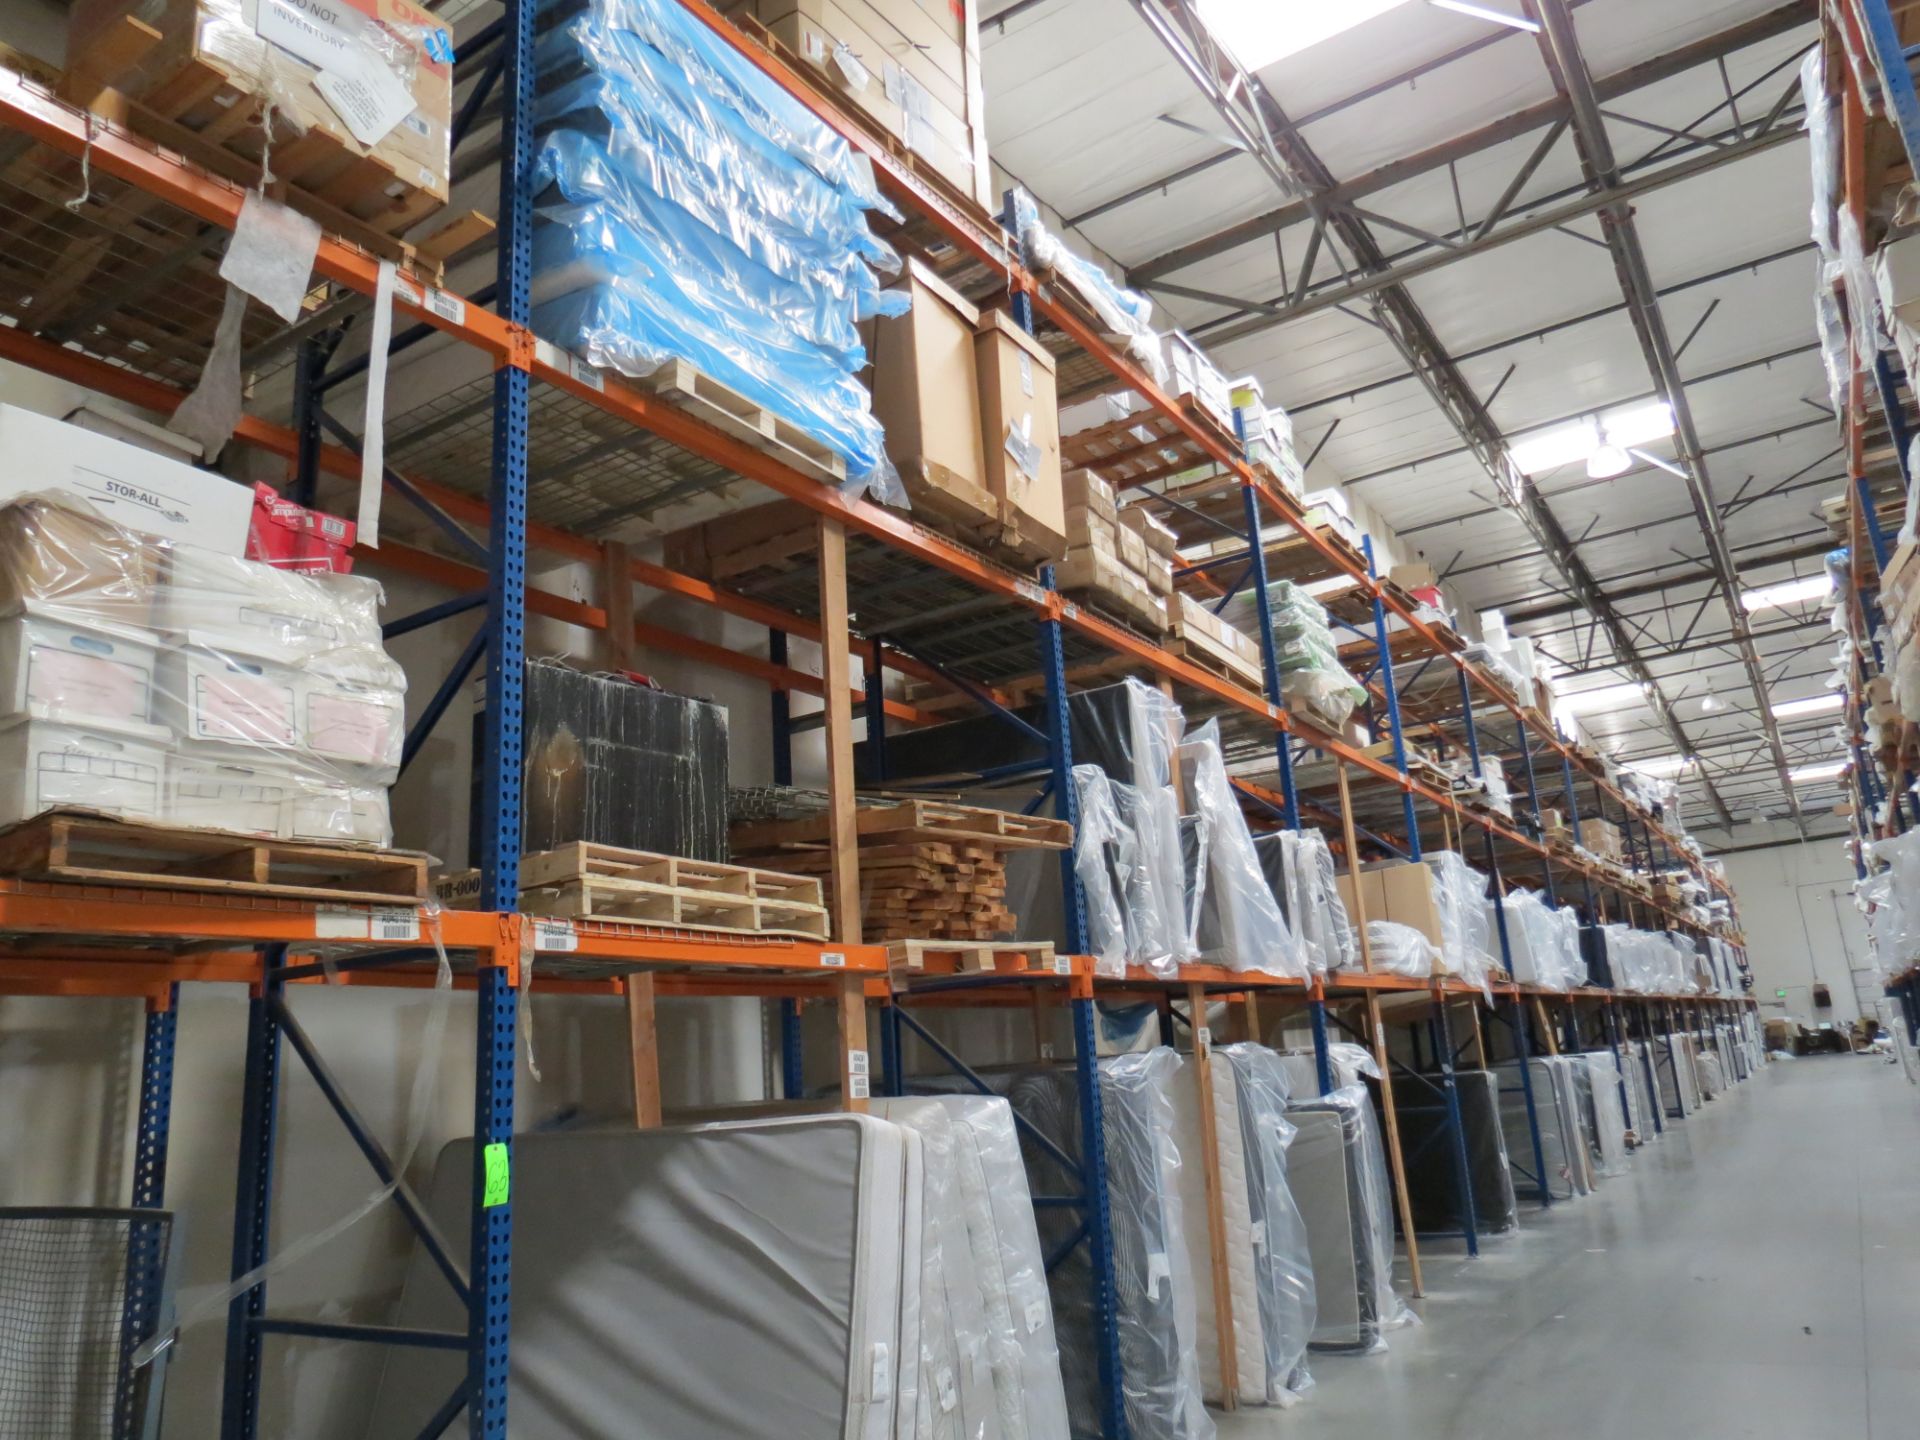 Sections of Pallet Racking Orange / Blue (Must be removed by 12/20/19)